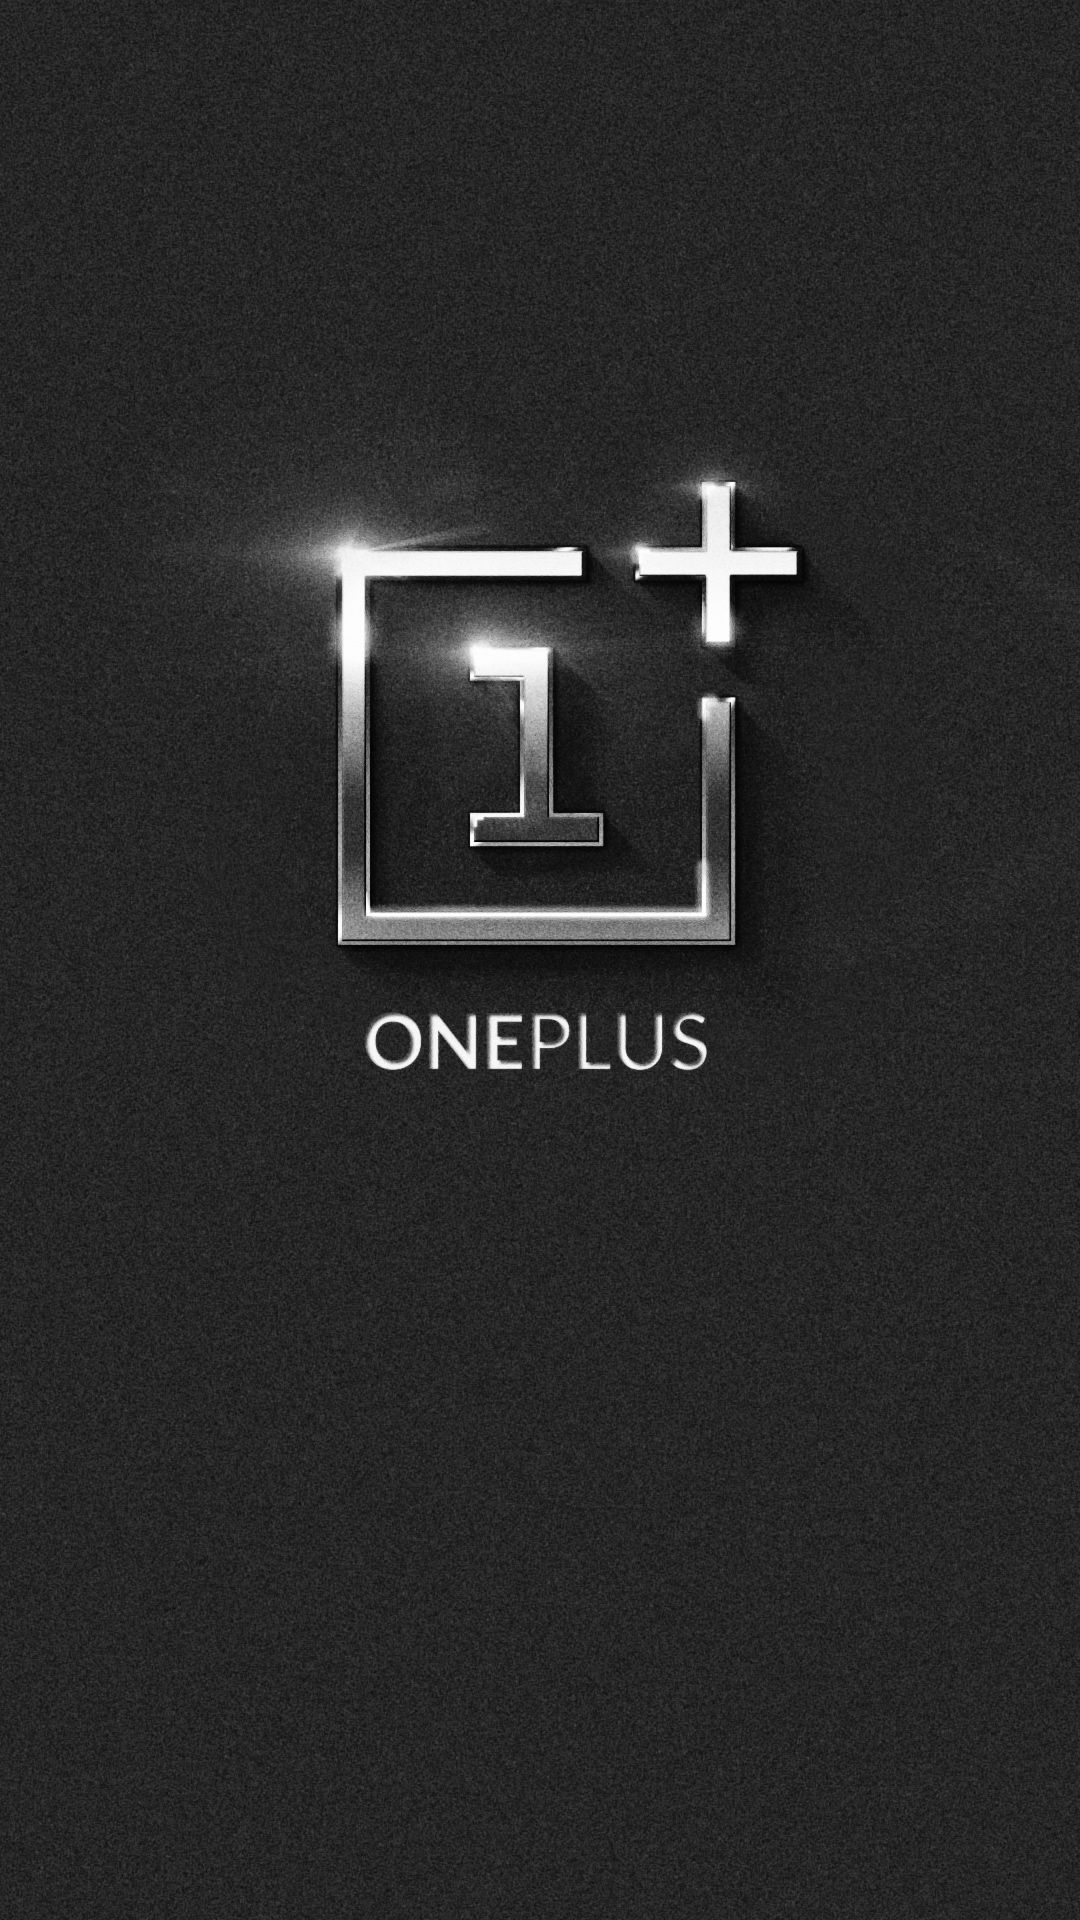 One Plus Logo Wallpapers - Wallpaper Cave